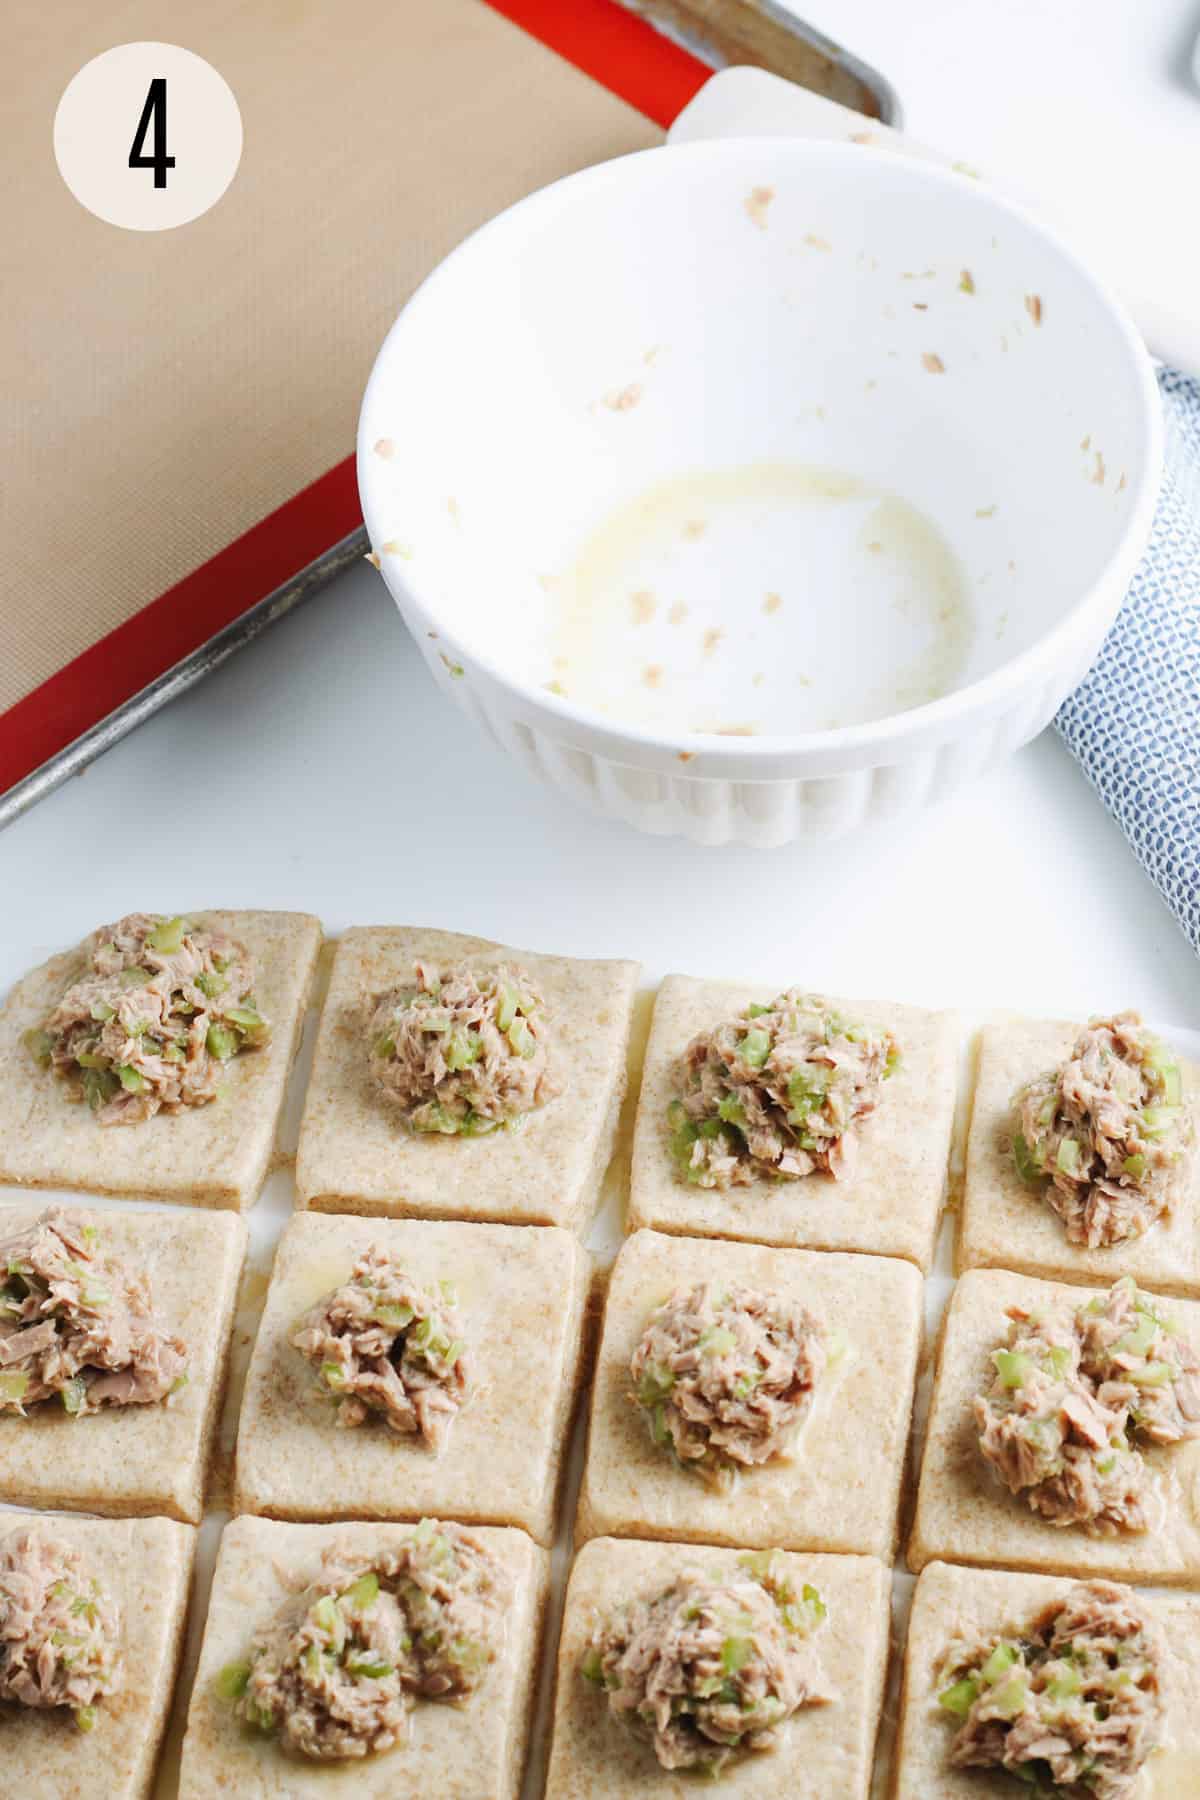 Squares of biscuit dough with scoops of tuna and celery mixture on each and white bowl and baking pan in upper background. 